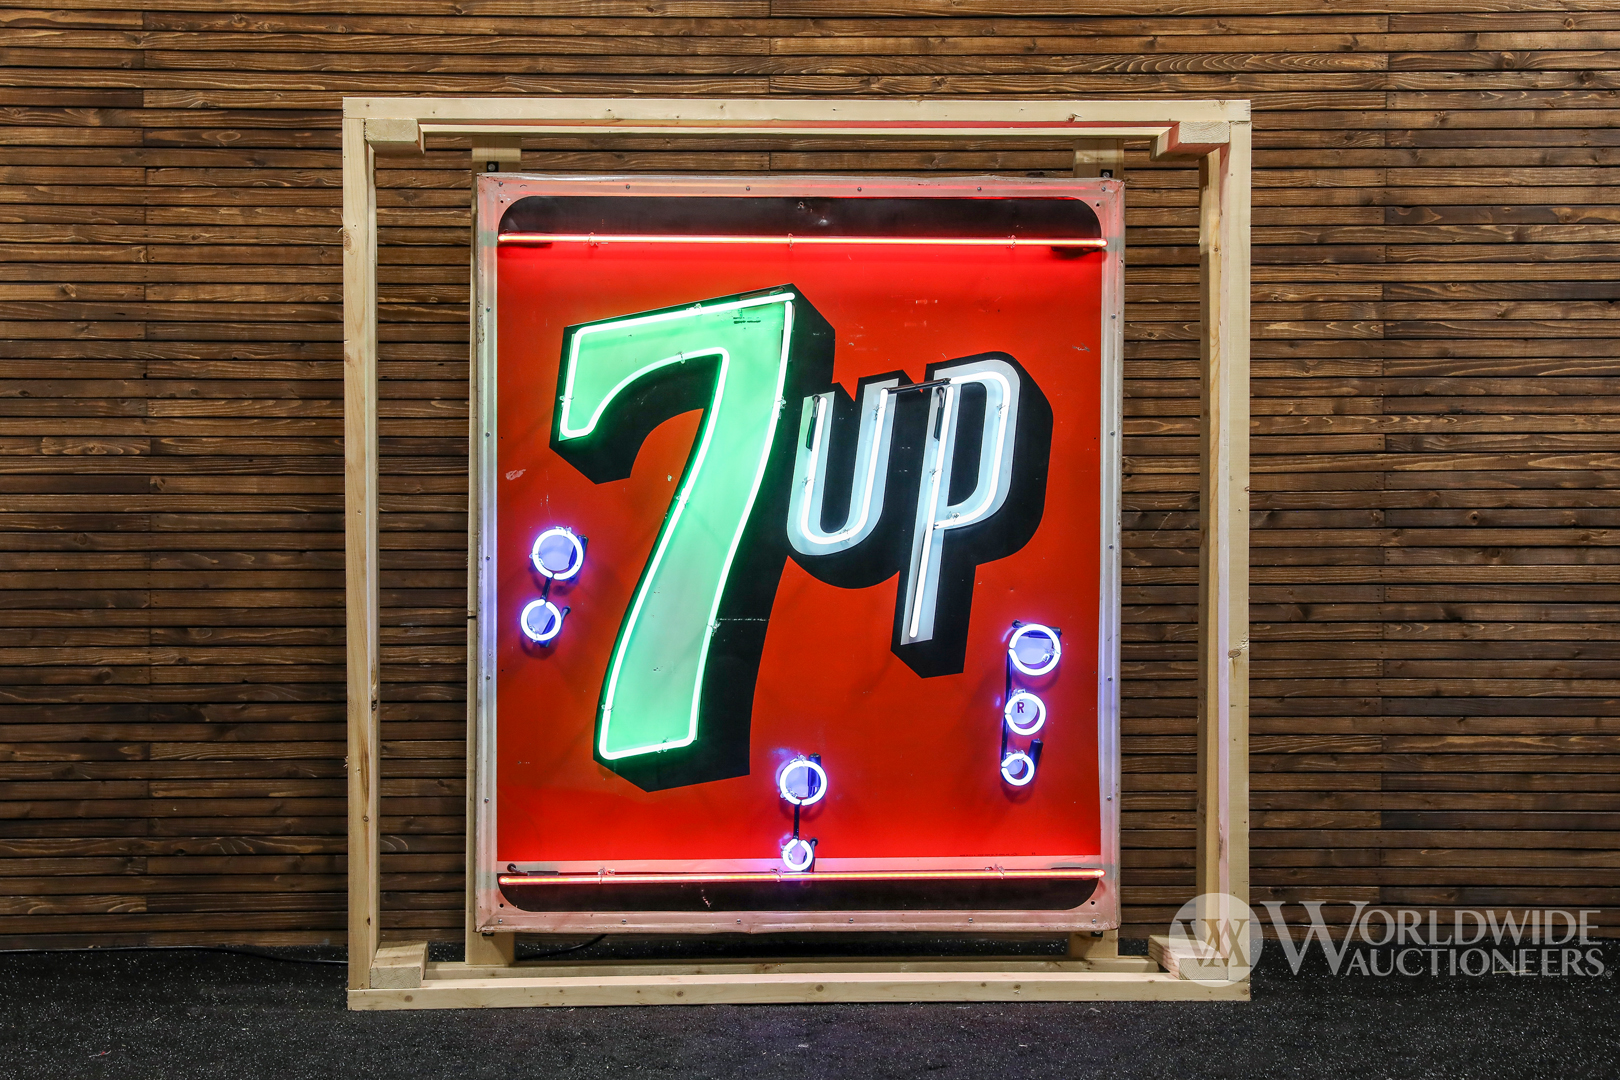 1950s Vintage 7-Up Single-Sided Tin Neon Sign